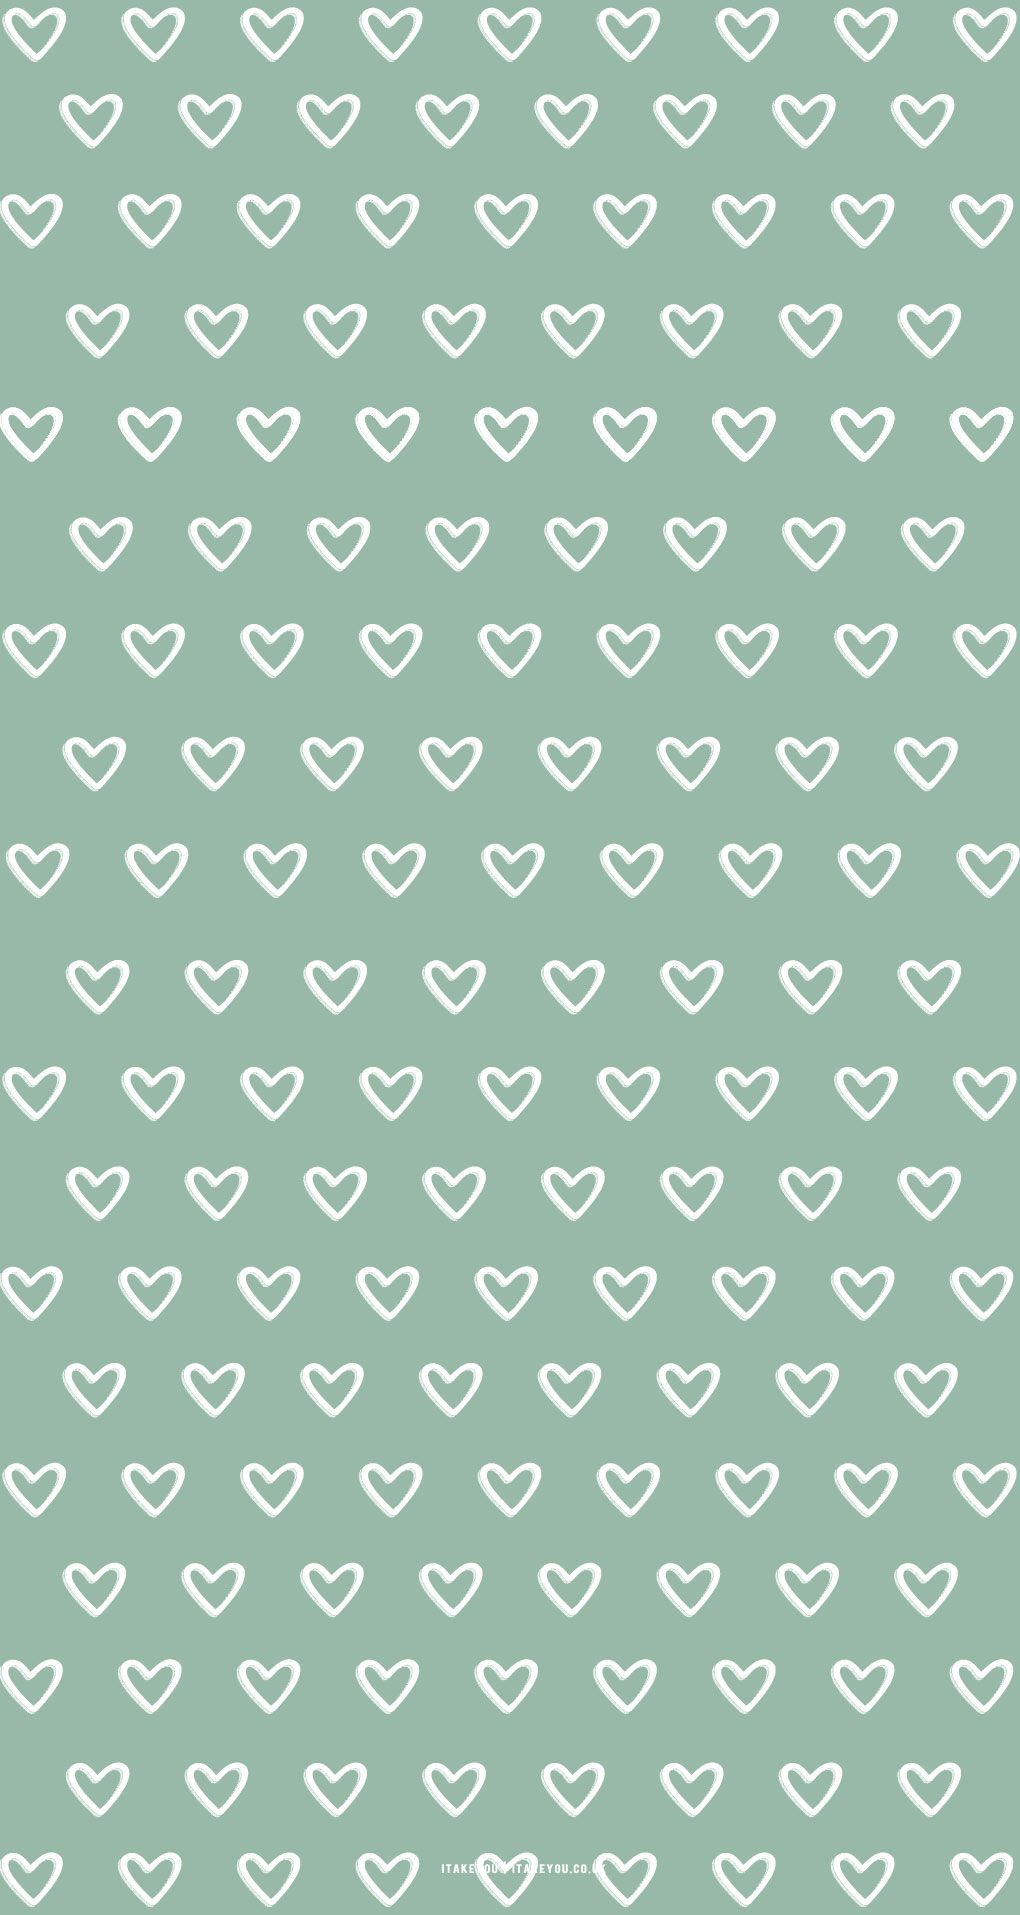 Cute Brown Aesthetic Wallpaper for Phone : Love Heart I Take You. Wedding Readings. Wedding Ideas